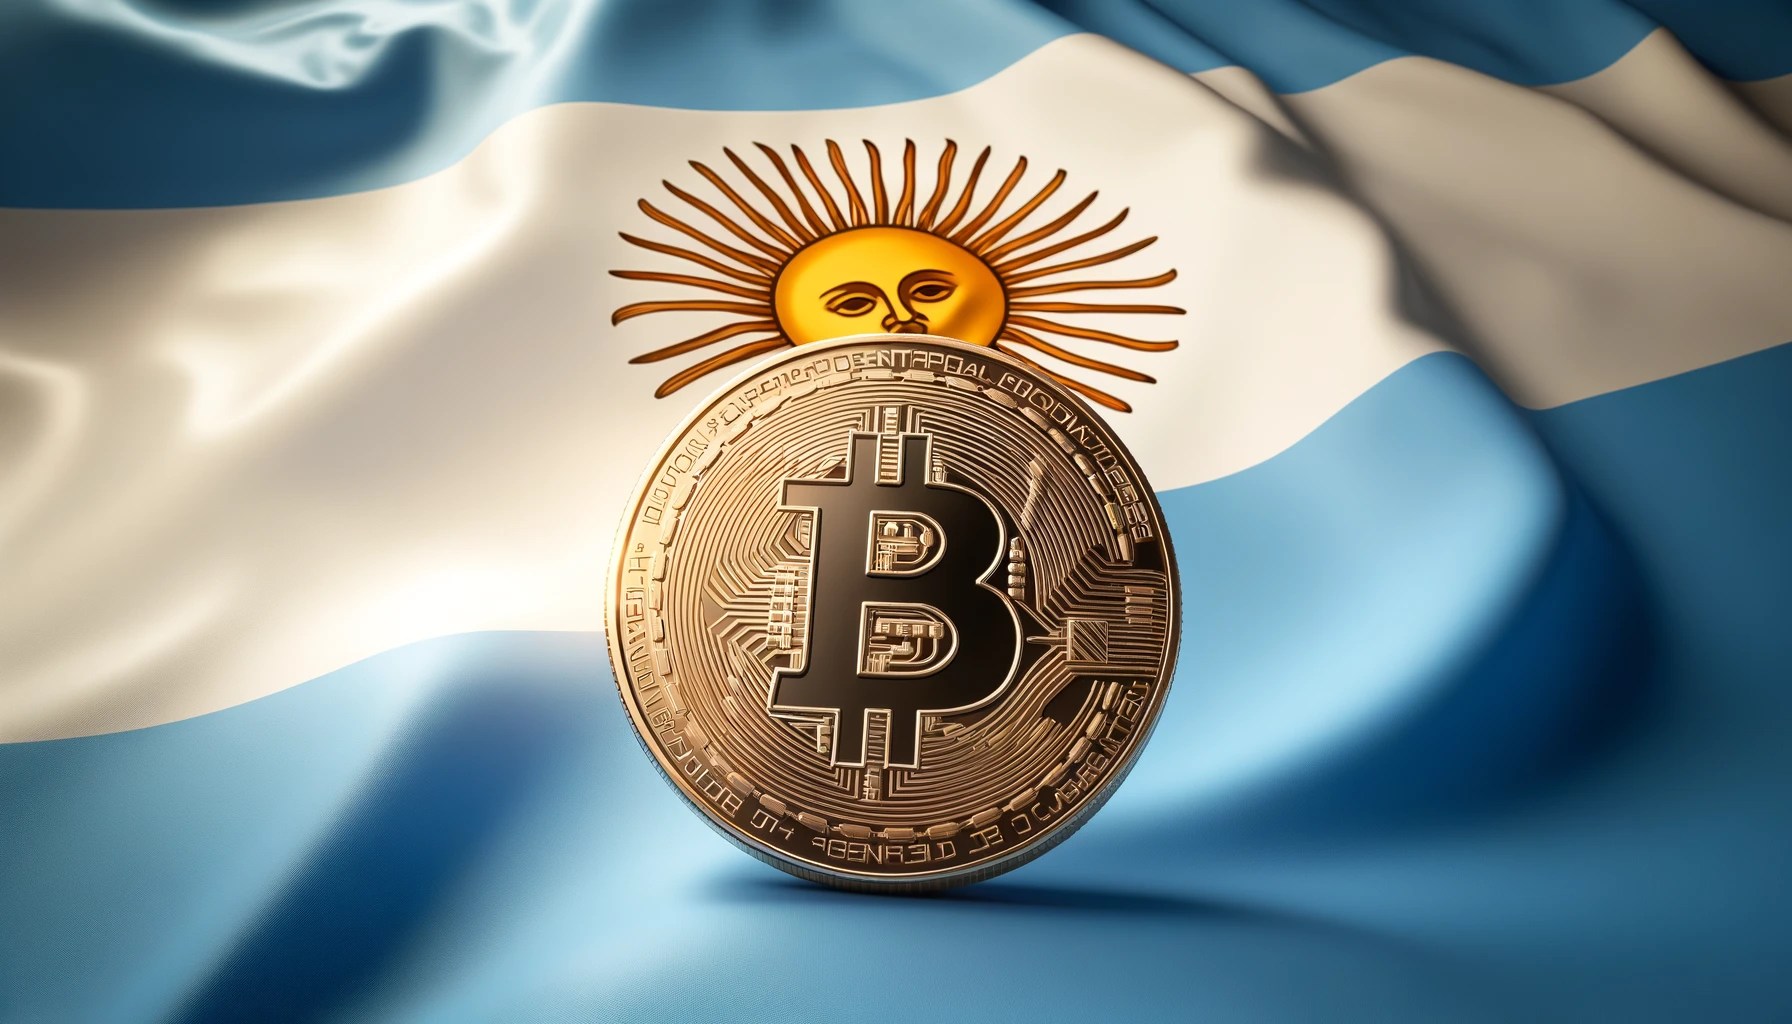 Genesis Digital Assets Partners with YPF Luz to Establish Green Bitcoin Mining Facility in Argentina